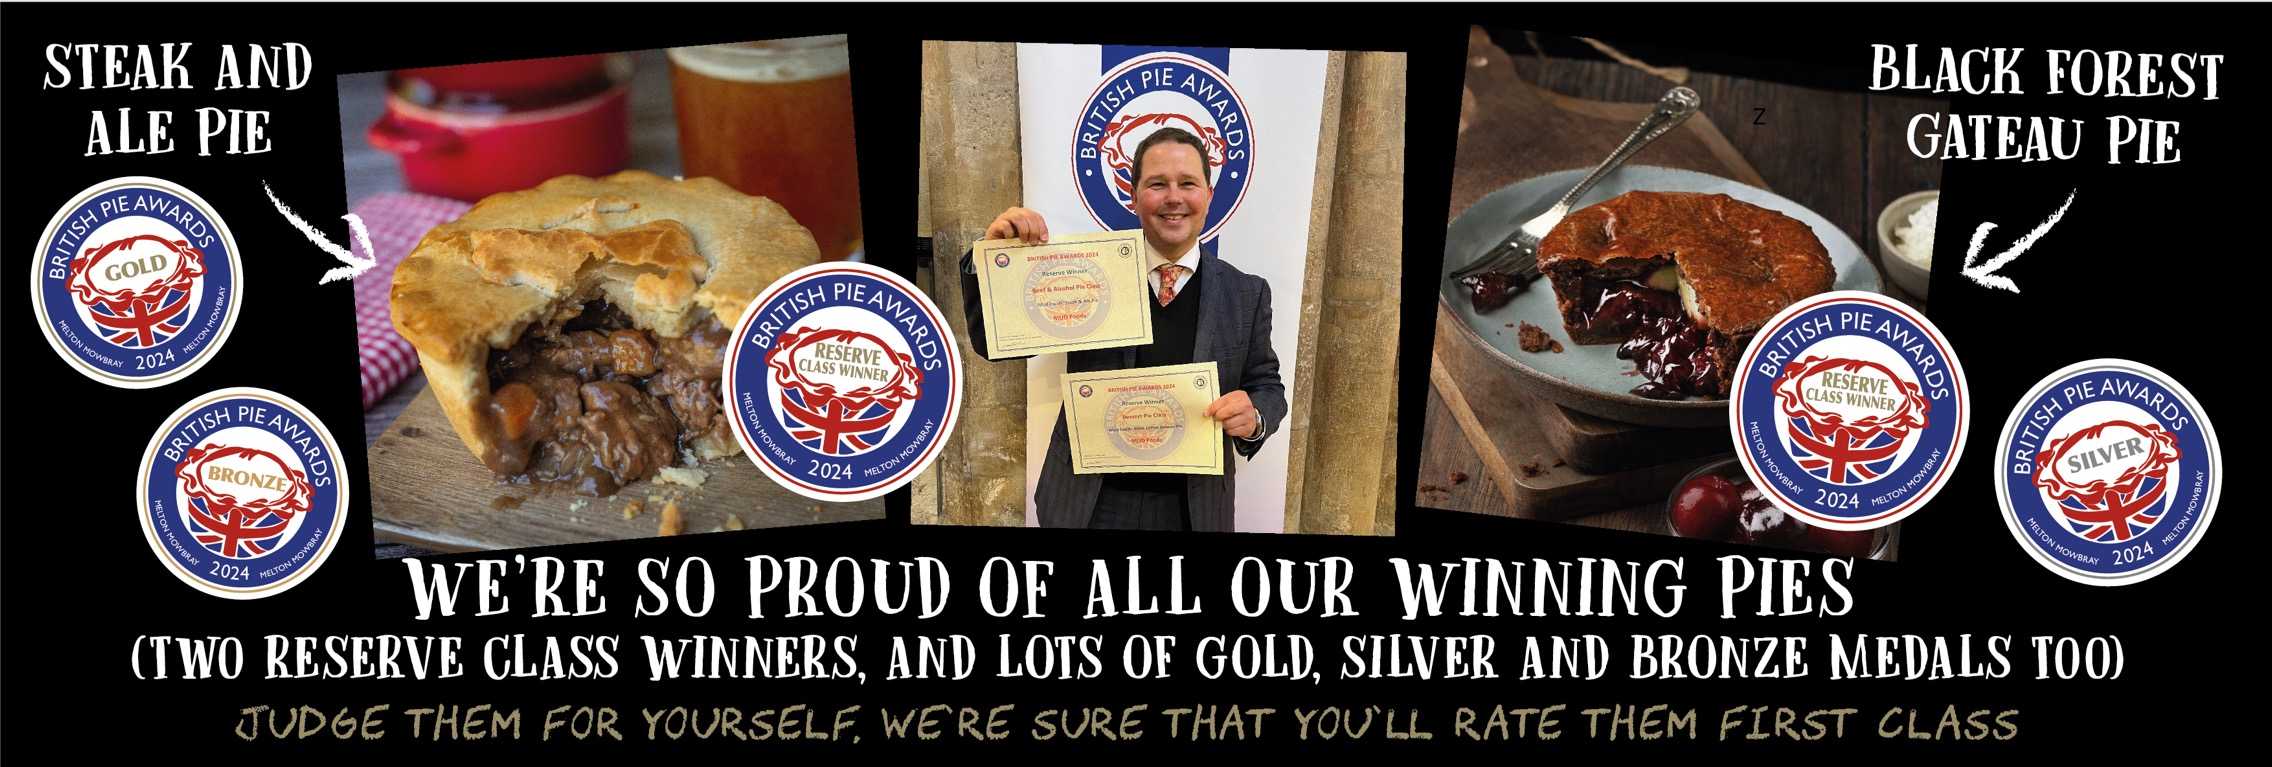 We're incredibly proud of our award-winning pies, boasting two reserve class winners alongside numerous gold, silver, and bronze medals. We invite you to judge them for yourself, confident you'll rank them as top-notch!